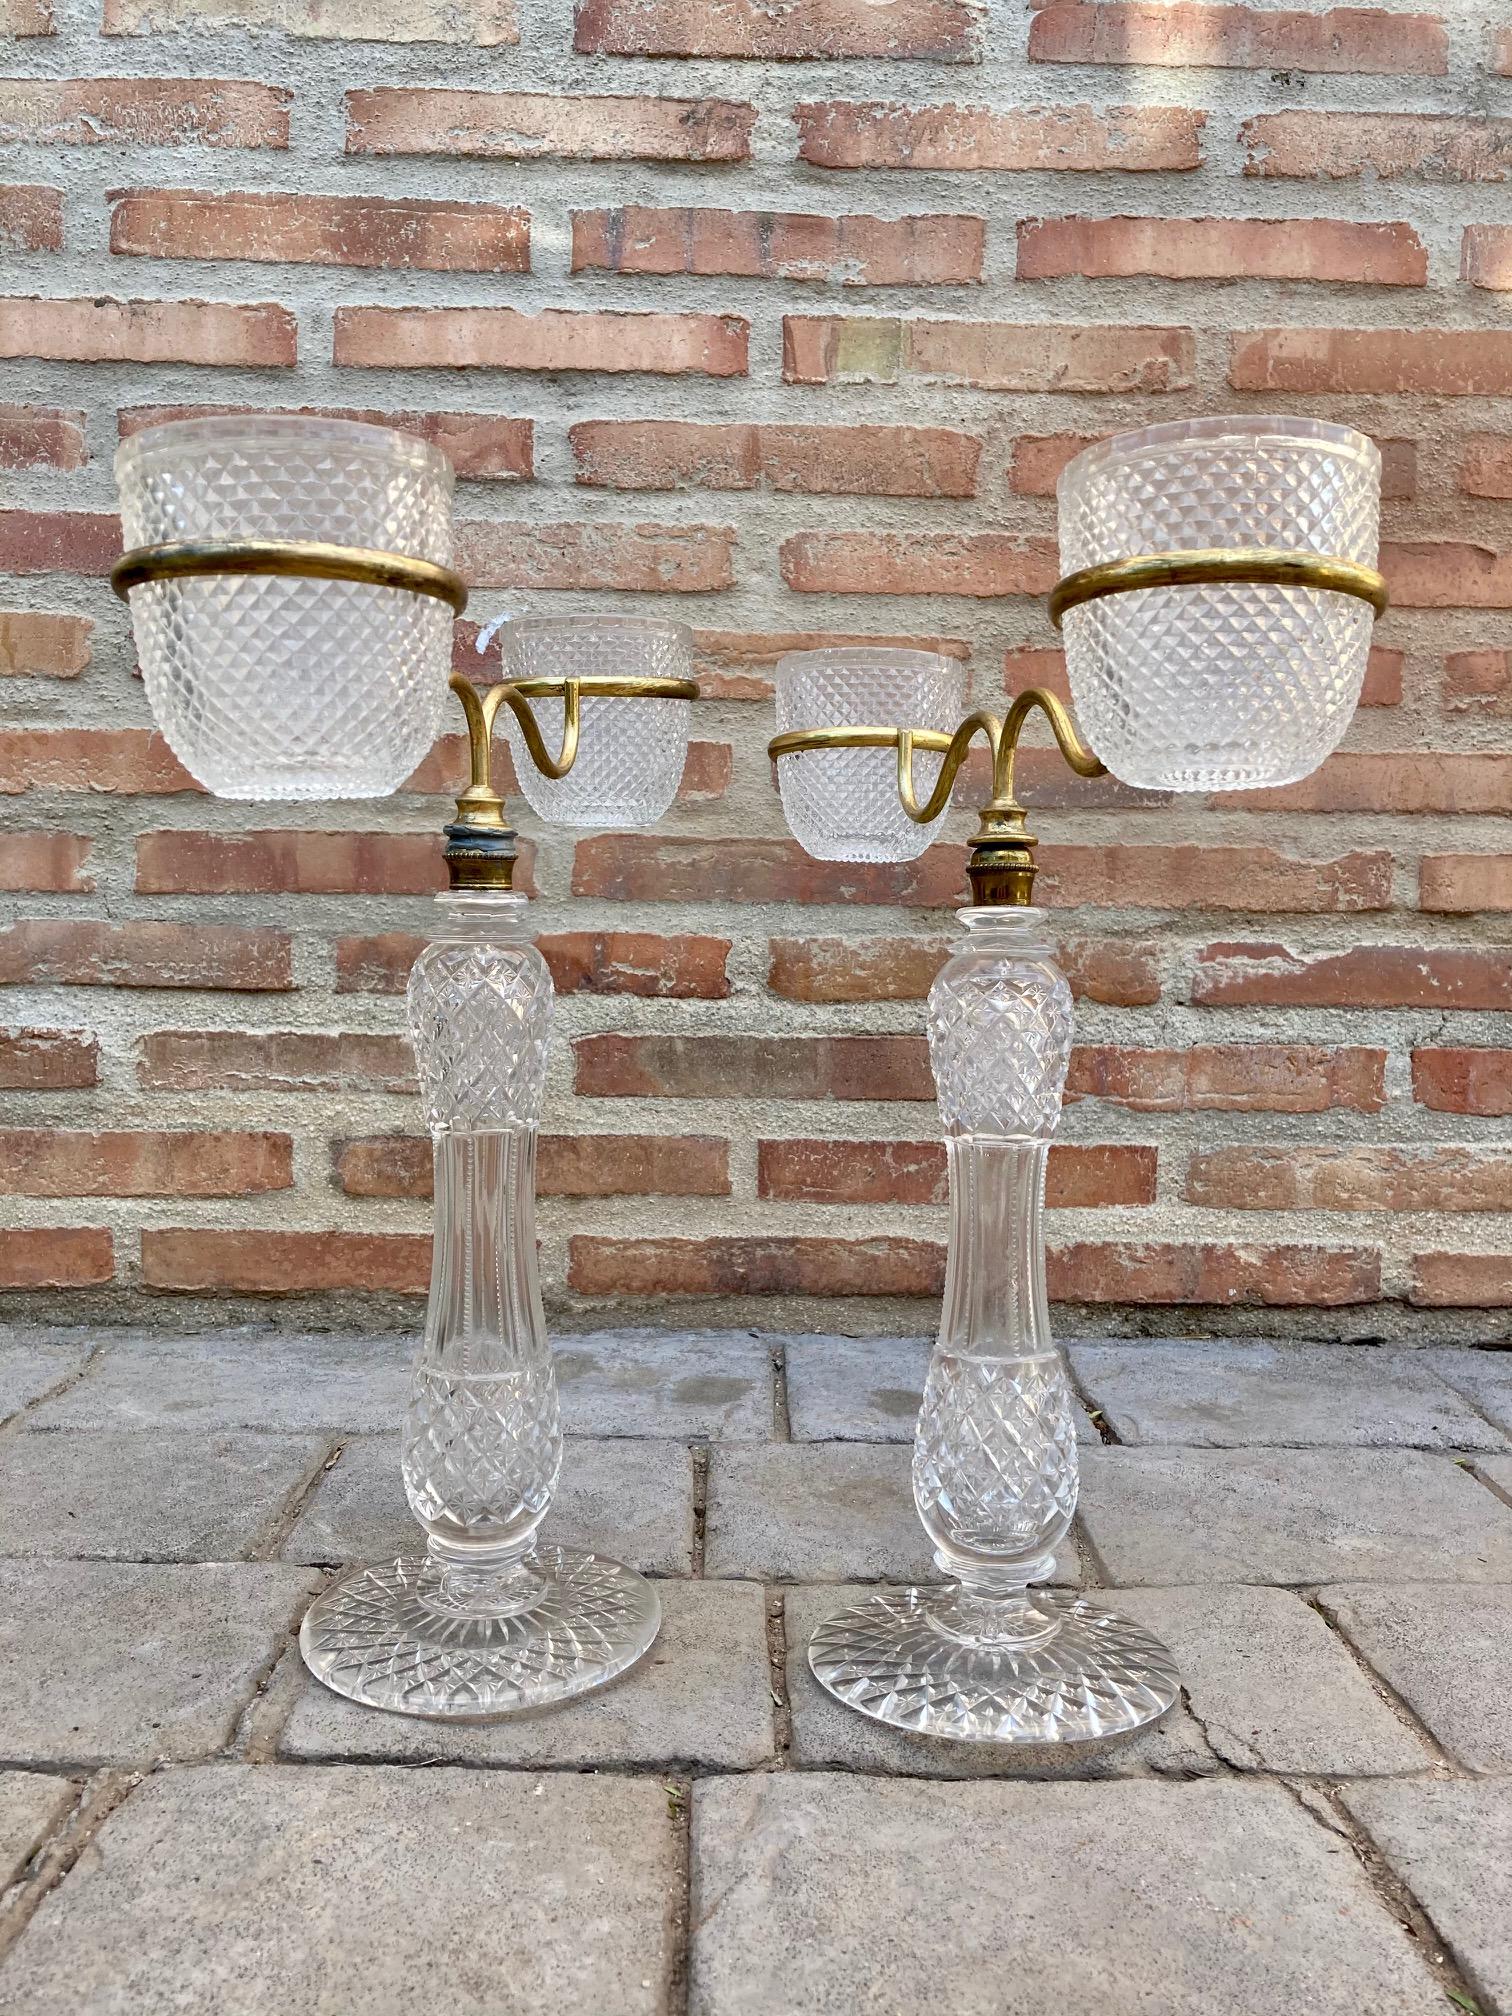 Late XIX pair of Victorian cut glass candle holders in brass from Cricklite Clarke trade. A rare late 19th century Cricklite Clarke Victorian candle holder comprising a cut glass base into which an arm is screwed with two lamp goblet rings and into